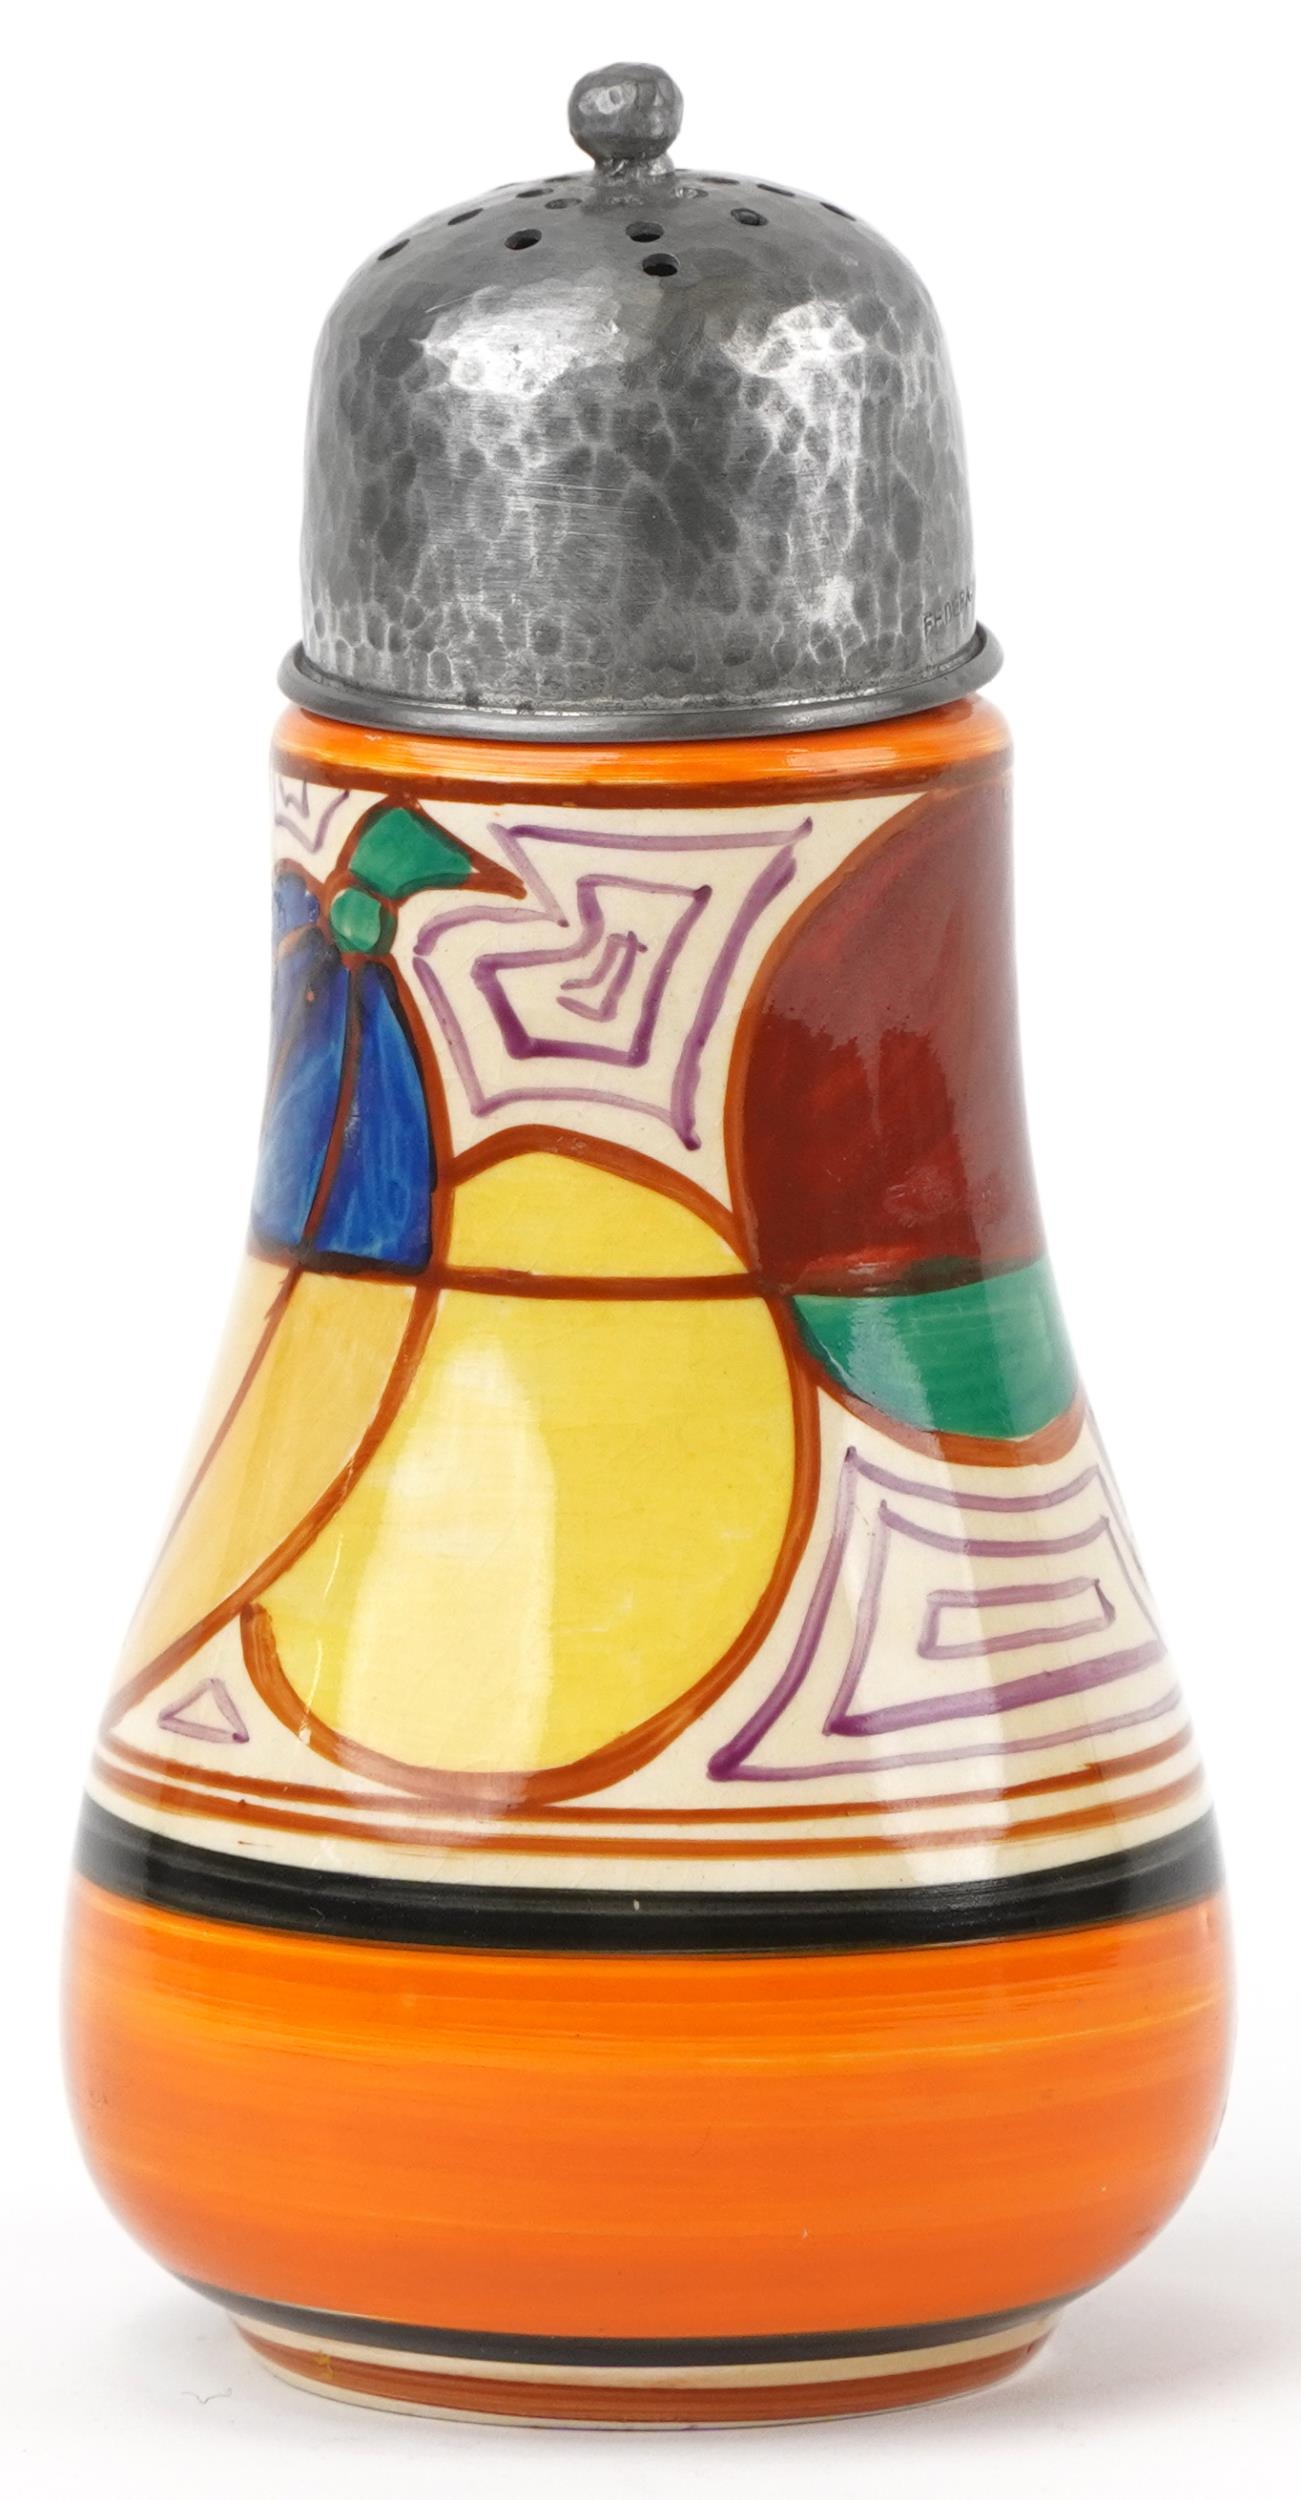 Clarice Cliff, Art Deco Fantastique Bizarre sifter with planished pewter lid hand painted in the - Image 3 of 7